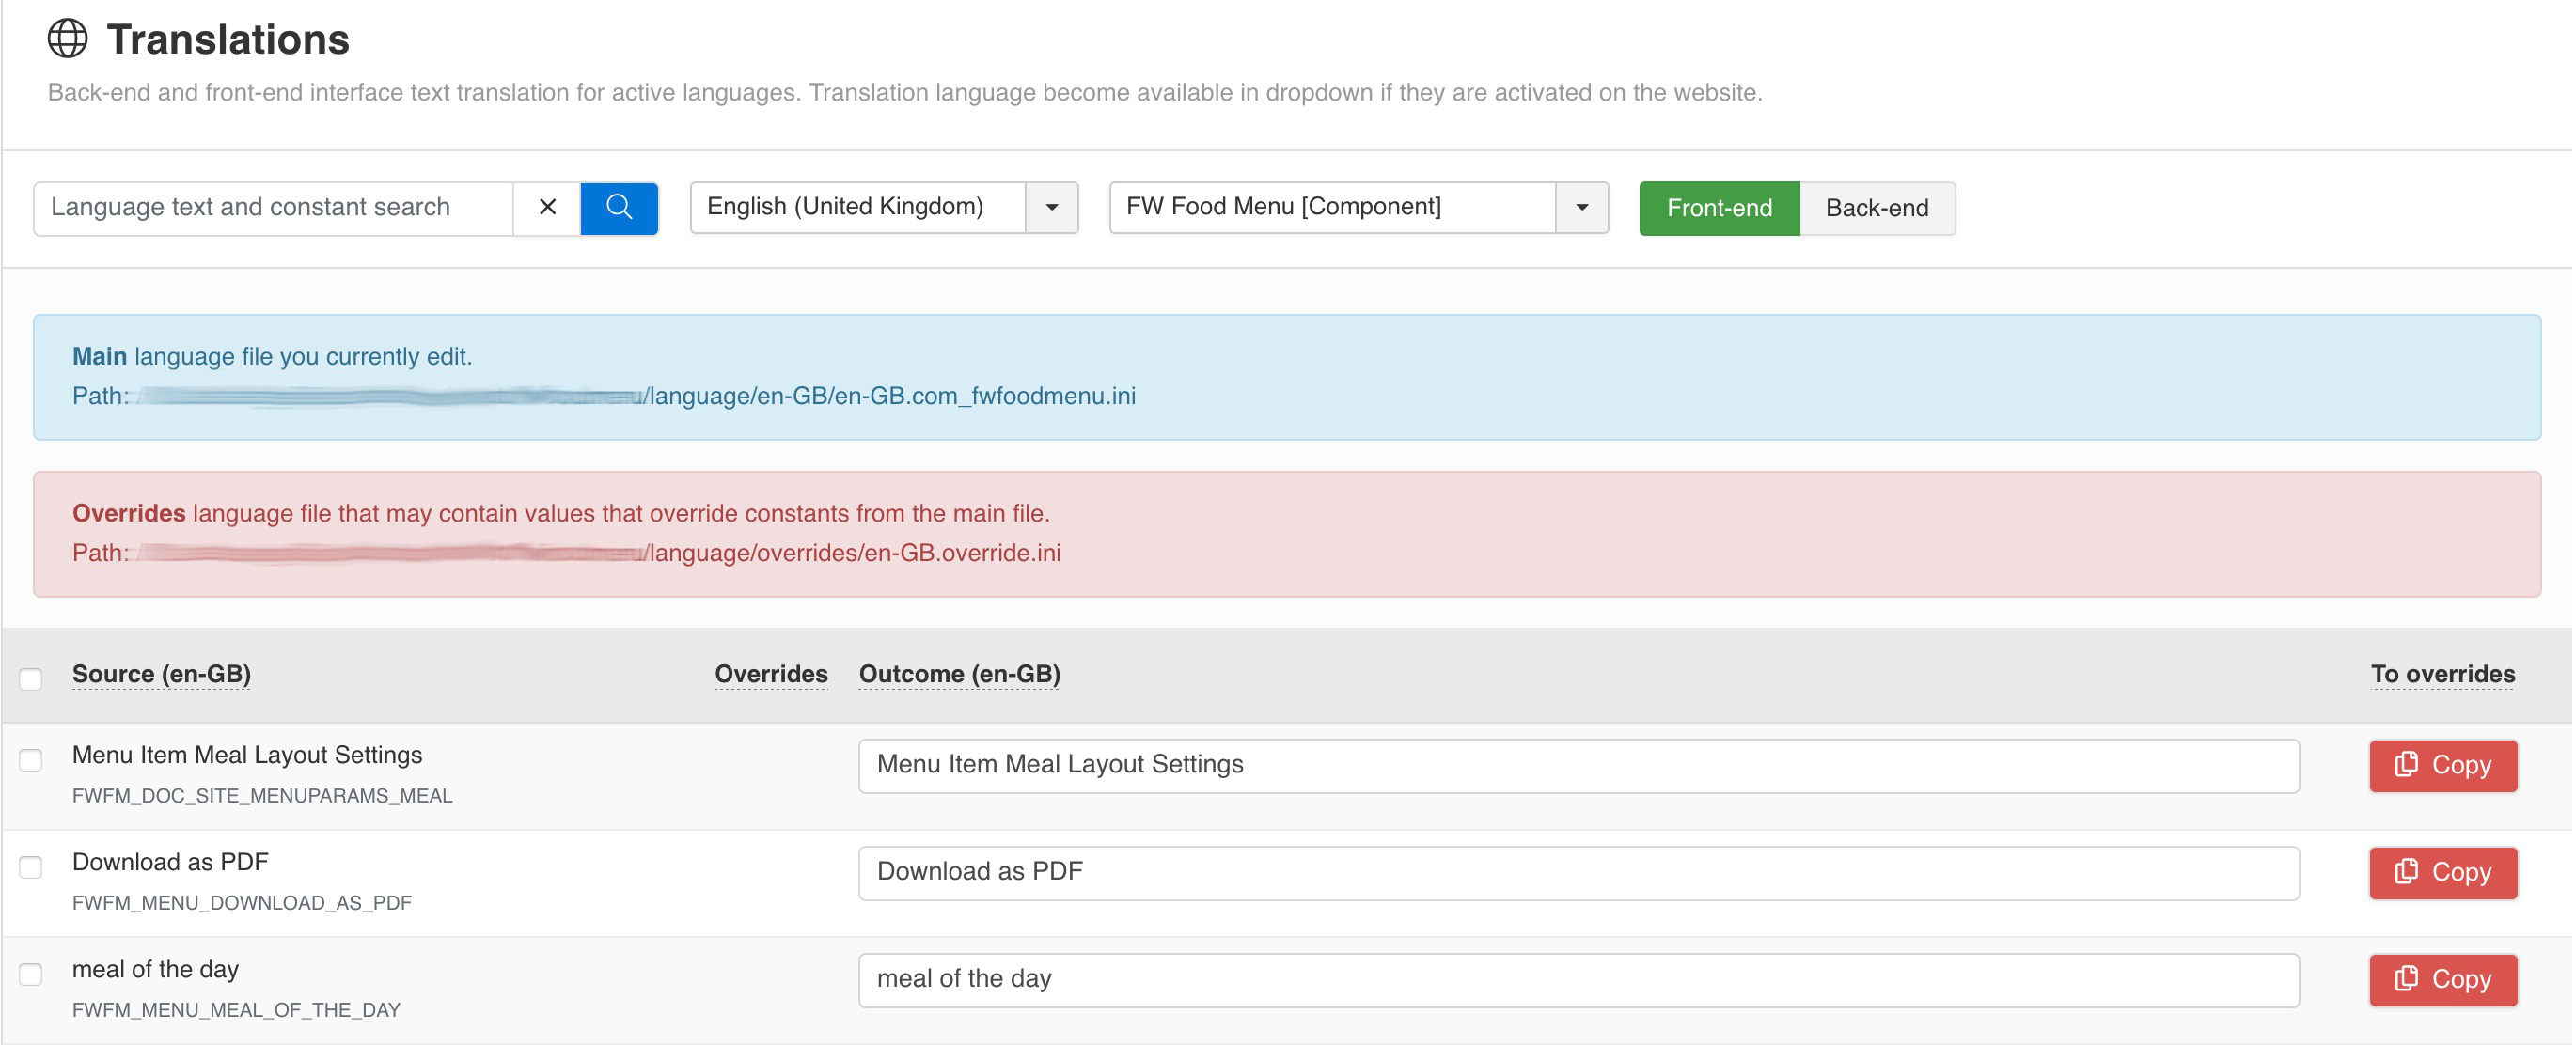 Back-end and front-end interface text translation for active languages. Translation language become available in dropdown if they are activated on a website.<div class="fw-doc-only"><strong>Located</strong> in <code>Admin Main Menu -> Components -> FW Food Menu -> Translations</code></div>